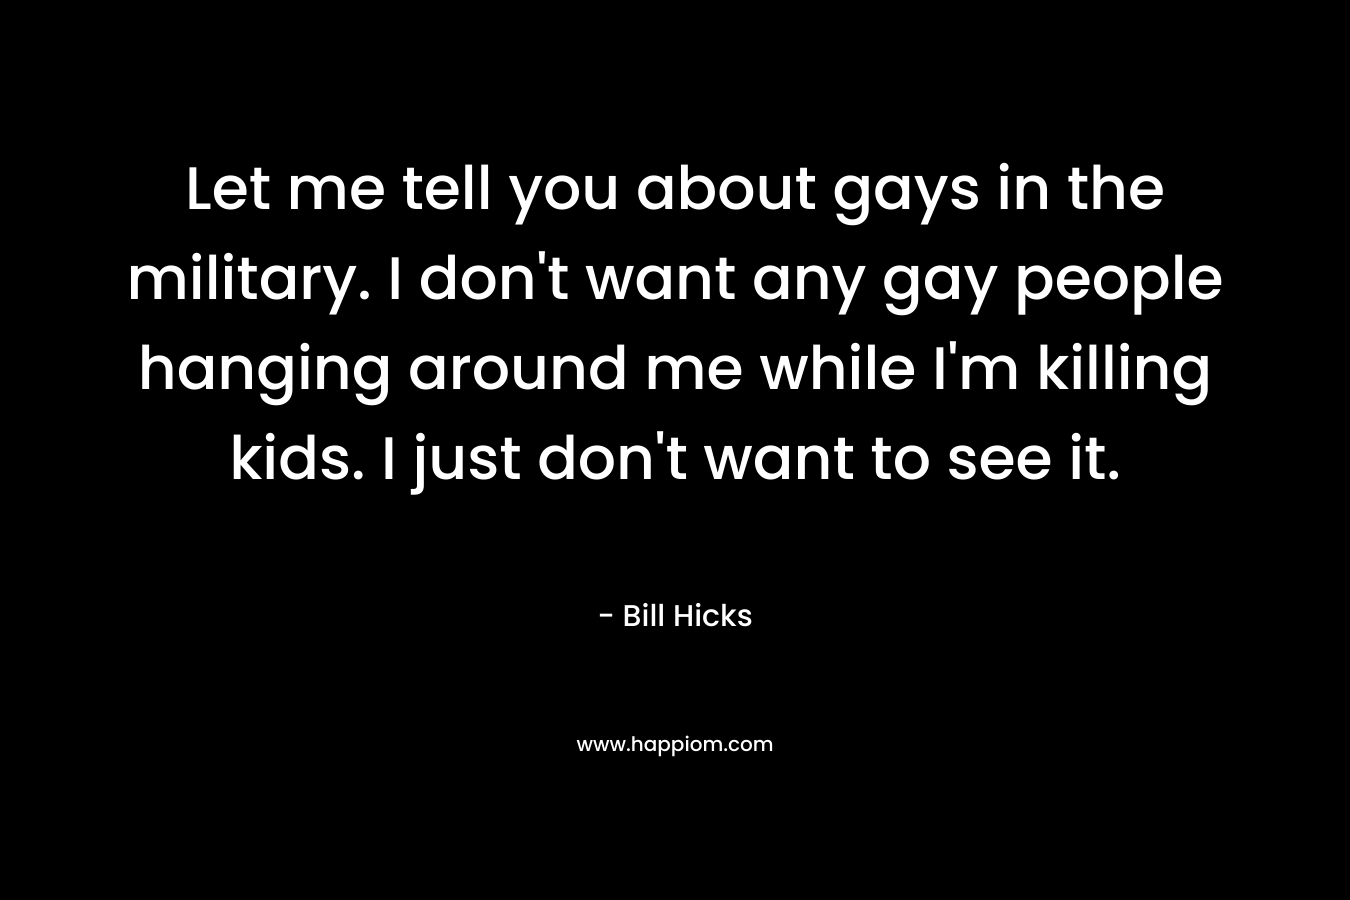 Let me tell you about gays in the military. I don’t want any gay people hanging around me while I’m killing kids. I just don’t want to see it. – Bill Hicks